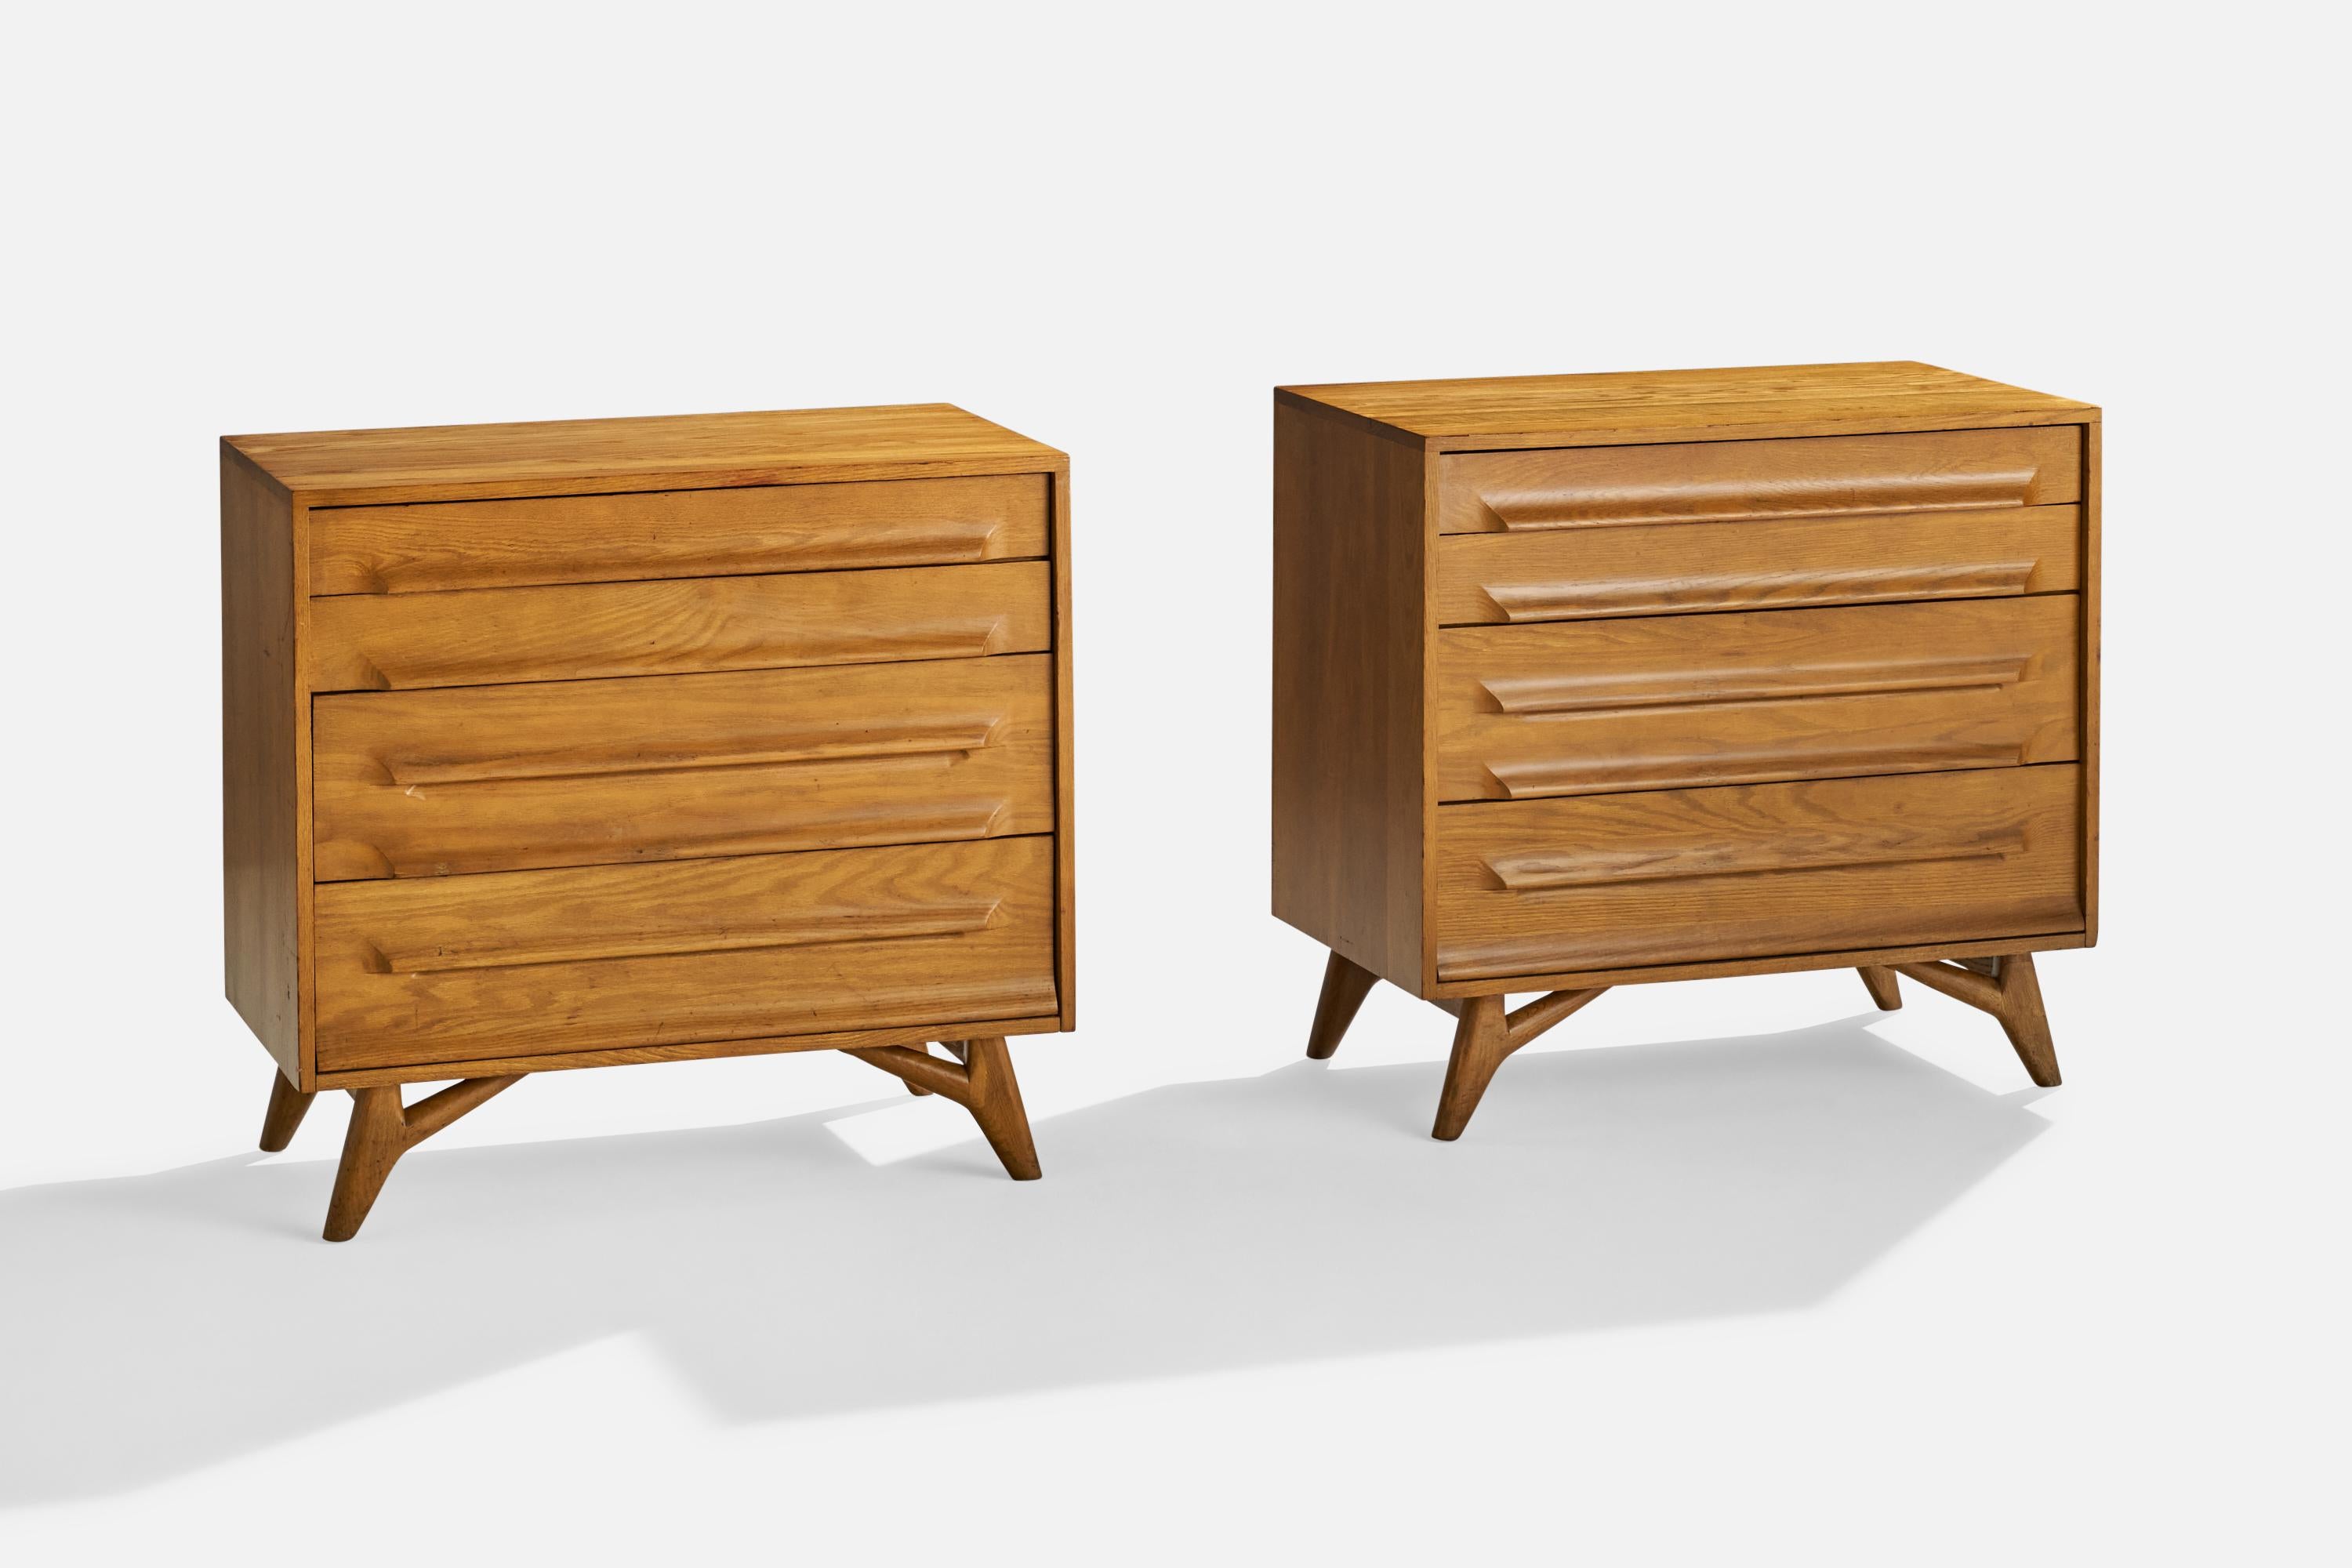 A pair of oak chestst of drawers designed by Jack Van Der Molen and produced by Jamestown Lounge Co, USA, 1950s.